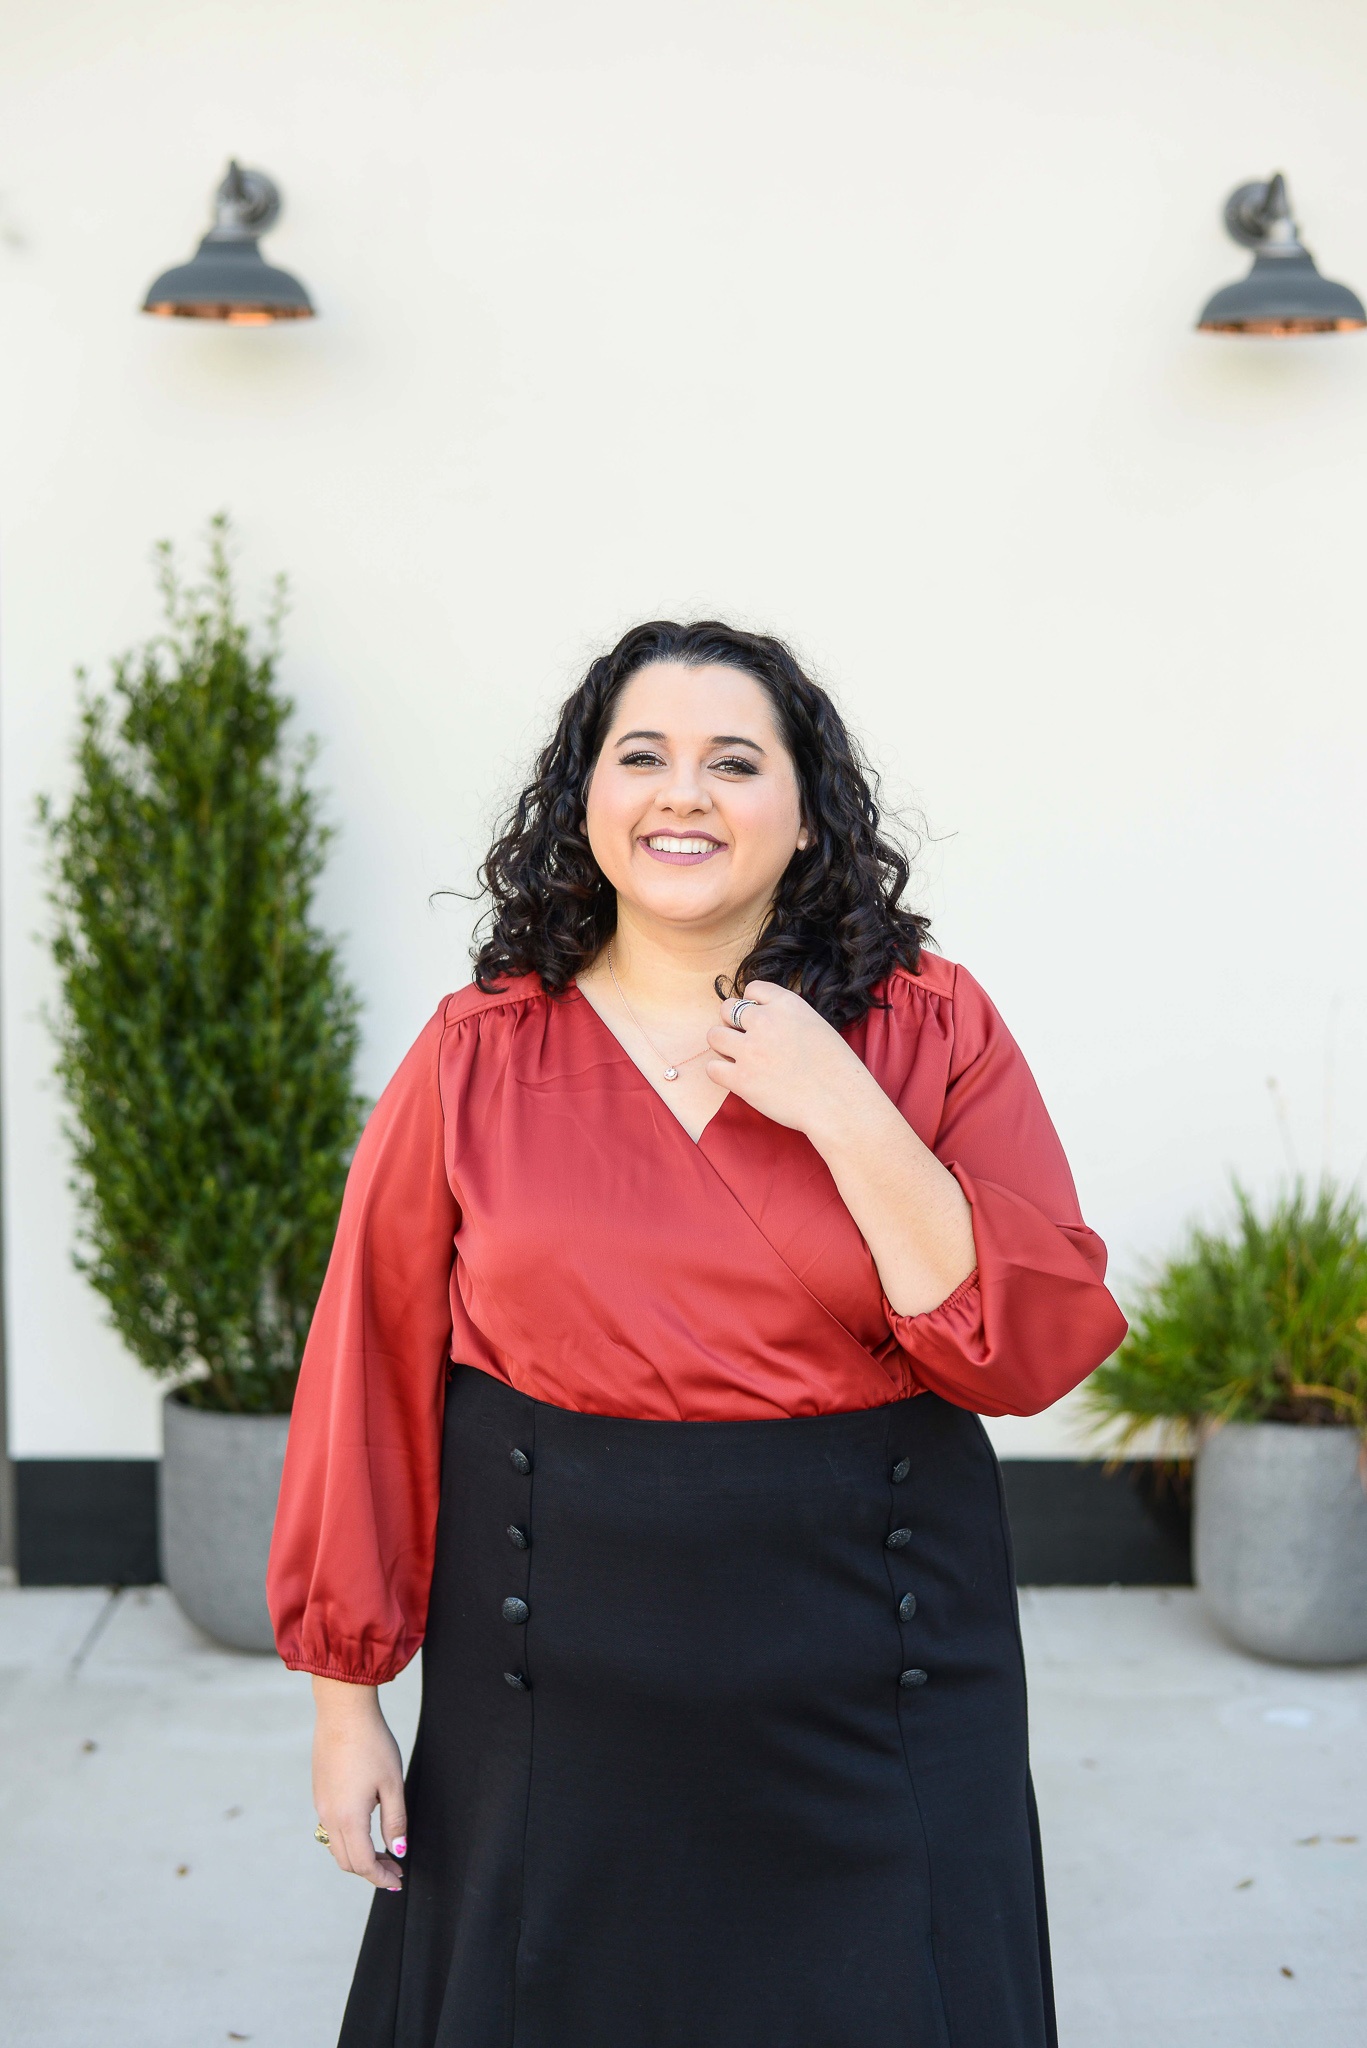 Soaking up all of the confidence vibes in this Lane Bryant plus size blouse